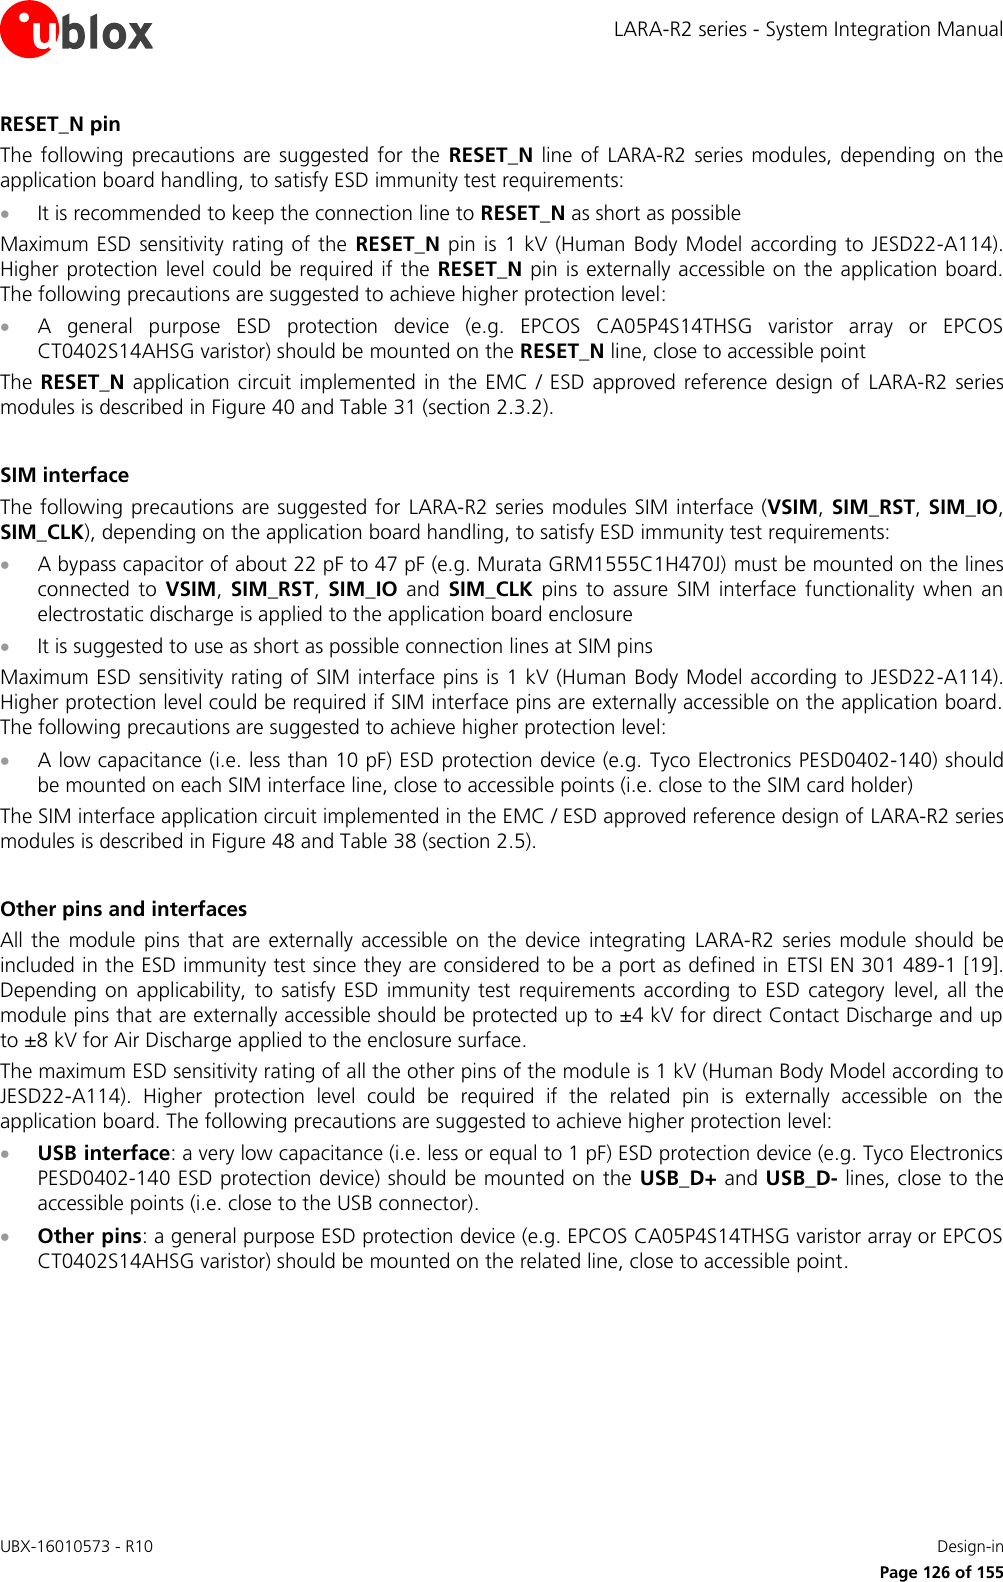 LARA-R2 series - System Integration Manual UBX-16010573 - R10    Design-in     Page 126 of 155 RESET_N pin The  following precautions are suggested  for the  RESET_N  line of  LARA-R2  series modules,  depending  on  the application board handling, to satisfy ESD immunity test requirements:  It is recommended to keep the connection line to RESET_N as short as possible Maximum ESD  sensitivity rating of the  RESET_N  pin is  1  kV (Human Body Model according to JESD22-A114). Higher protection level could  be required if the  RESET_N pin is externally accessible on the application board. The following precautions are suggested to achieve higher protection level:  A  general  purpose  ESD  protection  device  (e.g.  EPCOS  CA05P4S14THSG  varistor  array  or  EPCOS CT0402S14AHSG varistor) should be mounted on the RESET_N line, close to accessible point The RESET_N  application circuit implemented  in the EMC  /  ESD approved reference design of  LARA-R2 series modules is described in Figure 40 and Table 31 (section 2.3.2).  SIM interface The following precautions are suggested for  LARA-R2 series modules SIM interface (VSIM,  SIM_RST, SIM_IO, SIM_CLK), depending on the application board handling, to satisfy ESD immunity test requirements:  A bypass capacitor of about 22 pF to 47 pF (e.g. Murata GRM1555C1H470J) must be mounted on the lines connected  to  VSIM,  SIM_RST,  SIM_IO  and  SIM_CLK  pins  to  assure  SIM  interface  functionality  when  an electrostatic discharge is applied to the application board enclosure  It is suggested to use as short as possible connection lines at SIM pins Maximum ESD sensitivity rating of SIM interface pins is 1 kV (Human Body Model according to JESD22-A114). Higher protection level could be required if SIM interface pins are externally accessible on the application board. The following precautions are suggested to achieve higher protection level:  A low capacitance (i.e. less than 10 pF) ESD protection device (e.g. Tyco Electronics PESD0402-140) should be mounted on each SIM interface line, close to accessible points (i.e. close to the SIM card holder) The SIM interface application circuit implemented in the EMC / ESD approved reference design of LARA-R2 series modules is described in Figure 48 and Table 38 (section 2.5).  Other pins and interfaces All the  module  pins that  are  externally  accessible  on the device  integrating  LARA-R2  series  module  should  be included in the ESD immunity test since they are considered to be a port as defined in  ETSI EN 301 489-1 [19]. Depending on applicability,  to  satisfy ESD  immunity  test requirements according  to  ESD category  level, all the module pins that are externally accessible should be protected up to ±4 kV for direct Contact Discharge and up to ±8 kV for Air Discharge applied to the enclosure surface. The maximum ESD sensitivity rating of all the other pins of the module is 1 kV (Human Body Model according to JESD22-A114).  Higher  protection  level  could  be  required  if  the  related  pin  is  externally  accessible  on  the application board. The following precautions are suggested to achieve higher protection level:  USB interface: a very low capacitance (i.e. less or equal to 1 pF) ESD protection device (e.g. Tyco Electronics PESD0402-140 ESD protection device) should be mounted on the USB_D+ and USB_D- lines, close to the accessible points (i.e. close to the USB connector).  Other pins: a general purpose ESD protection device (e.g. EPCOS CA05P4S14THSG varistor array or EPCOS CT0402S14AHSG varistor) should be mounted on the related line, close to accessible point.  